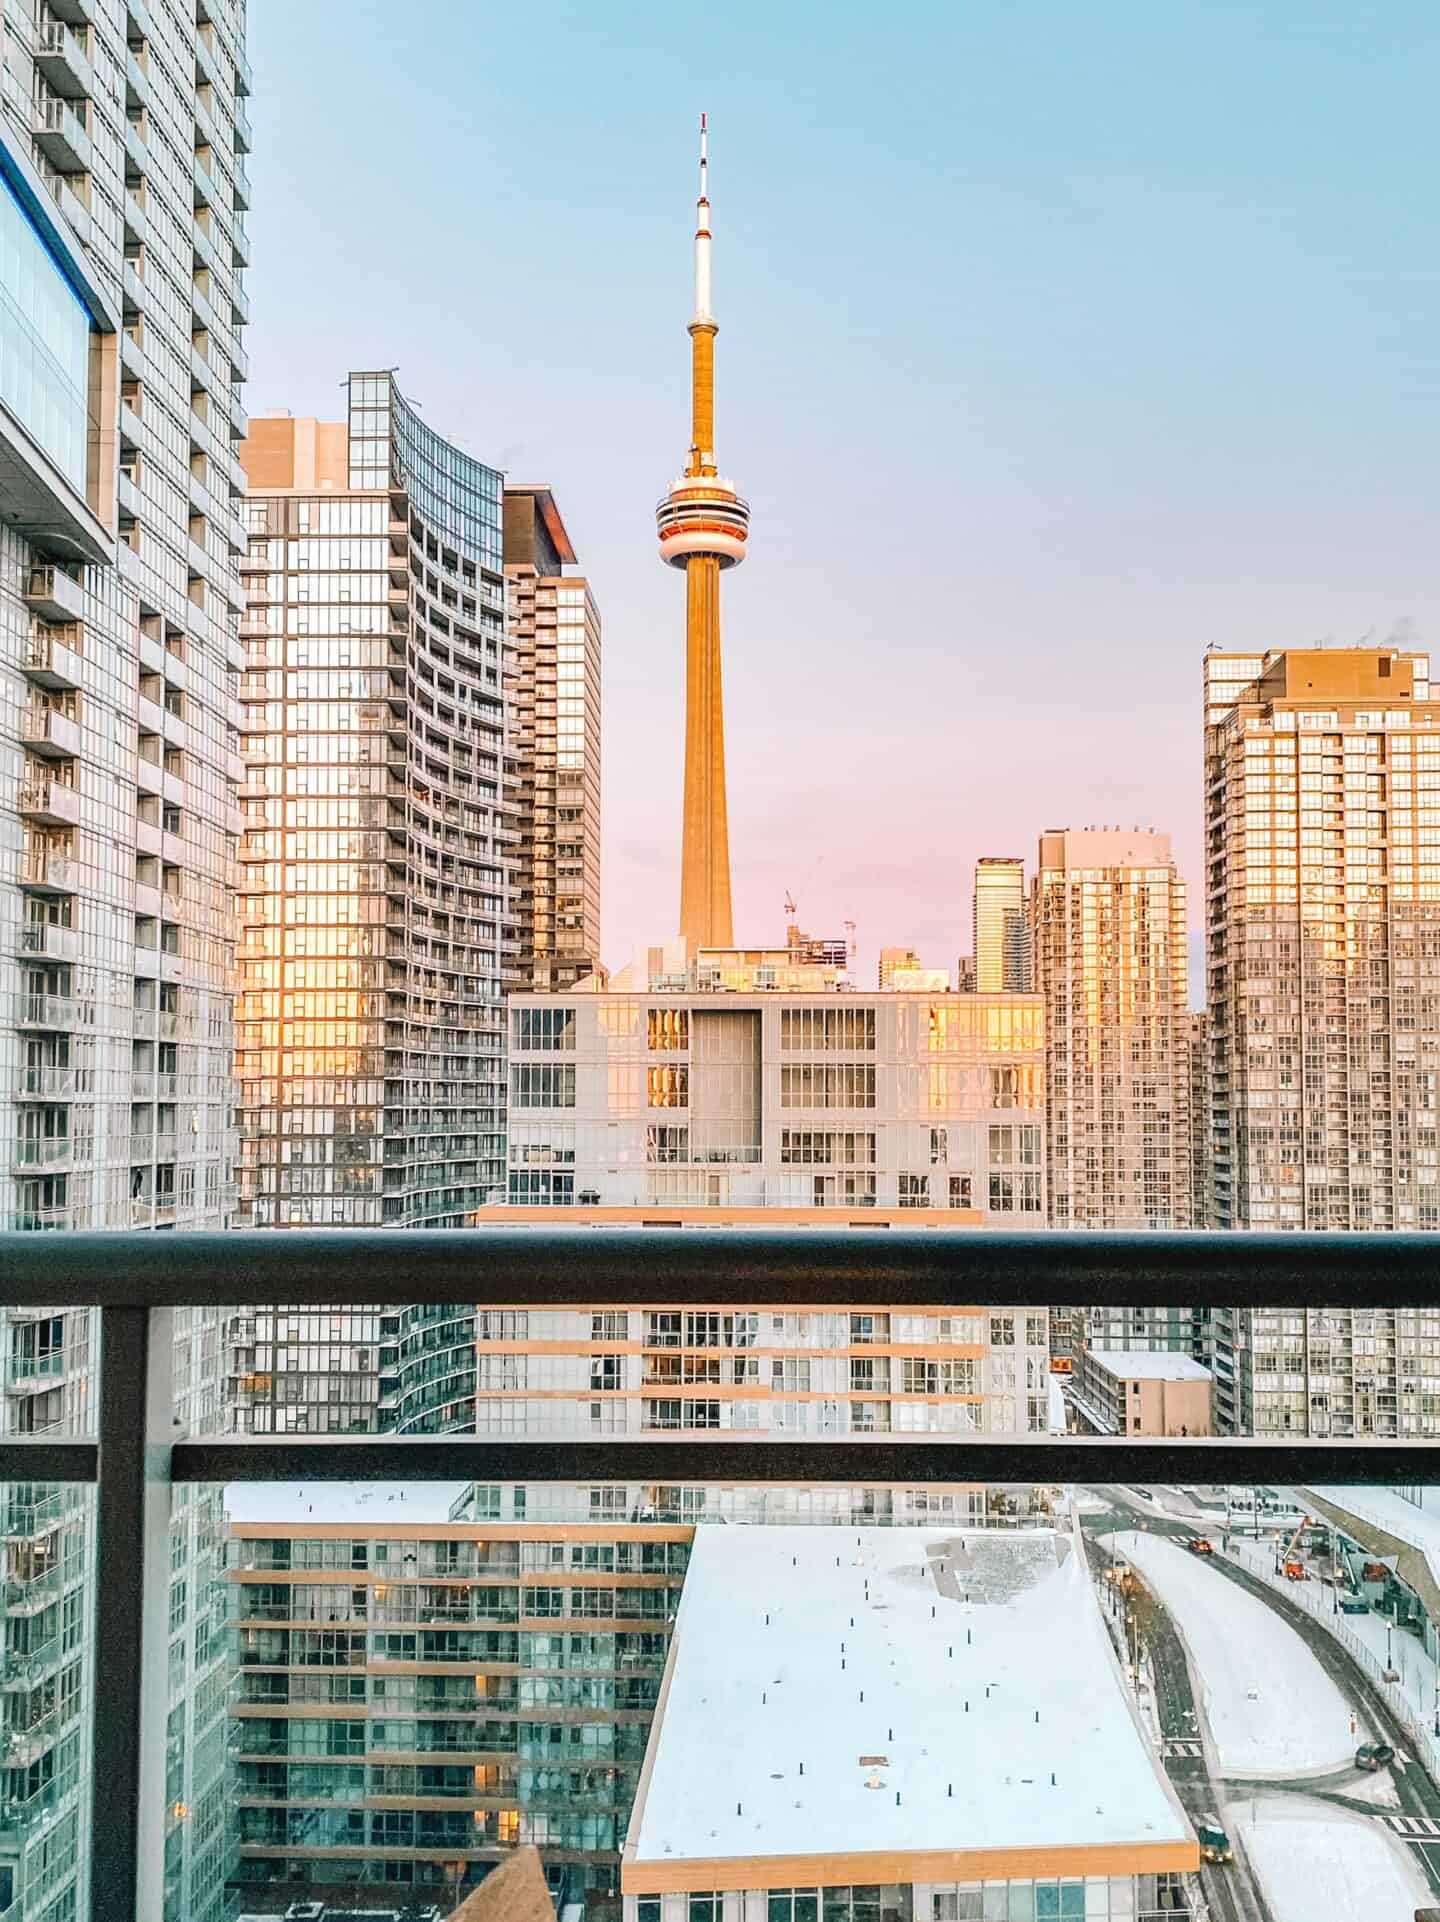 Views of the CN Tower from our Airbnb's balcony in Toronto 